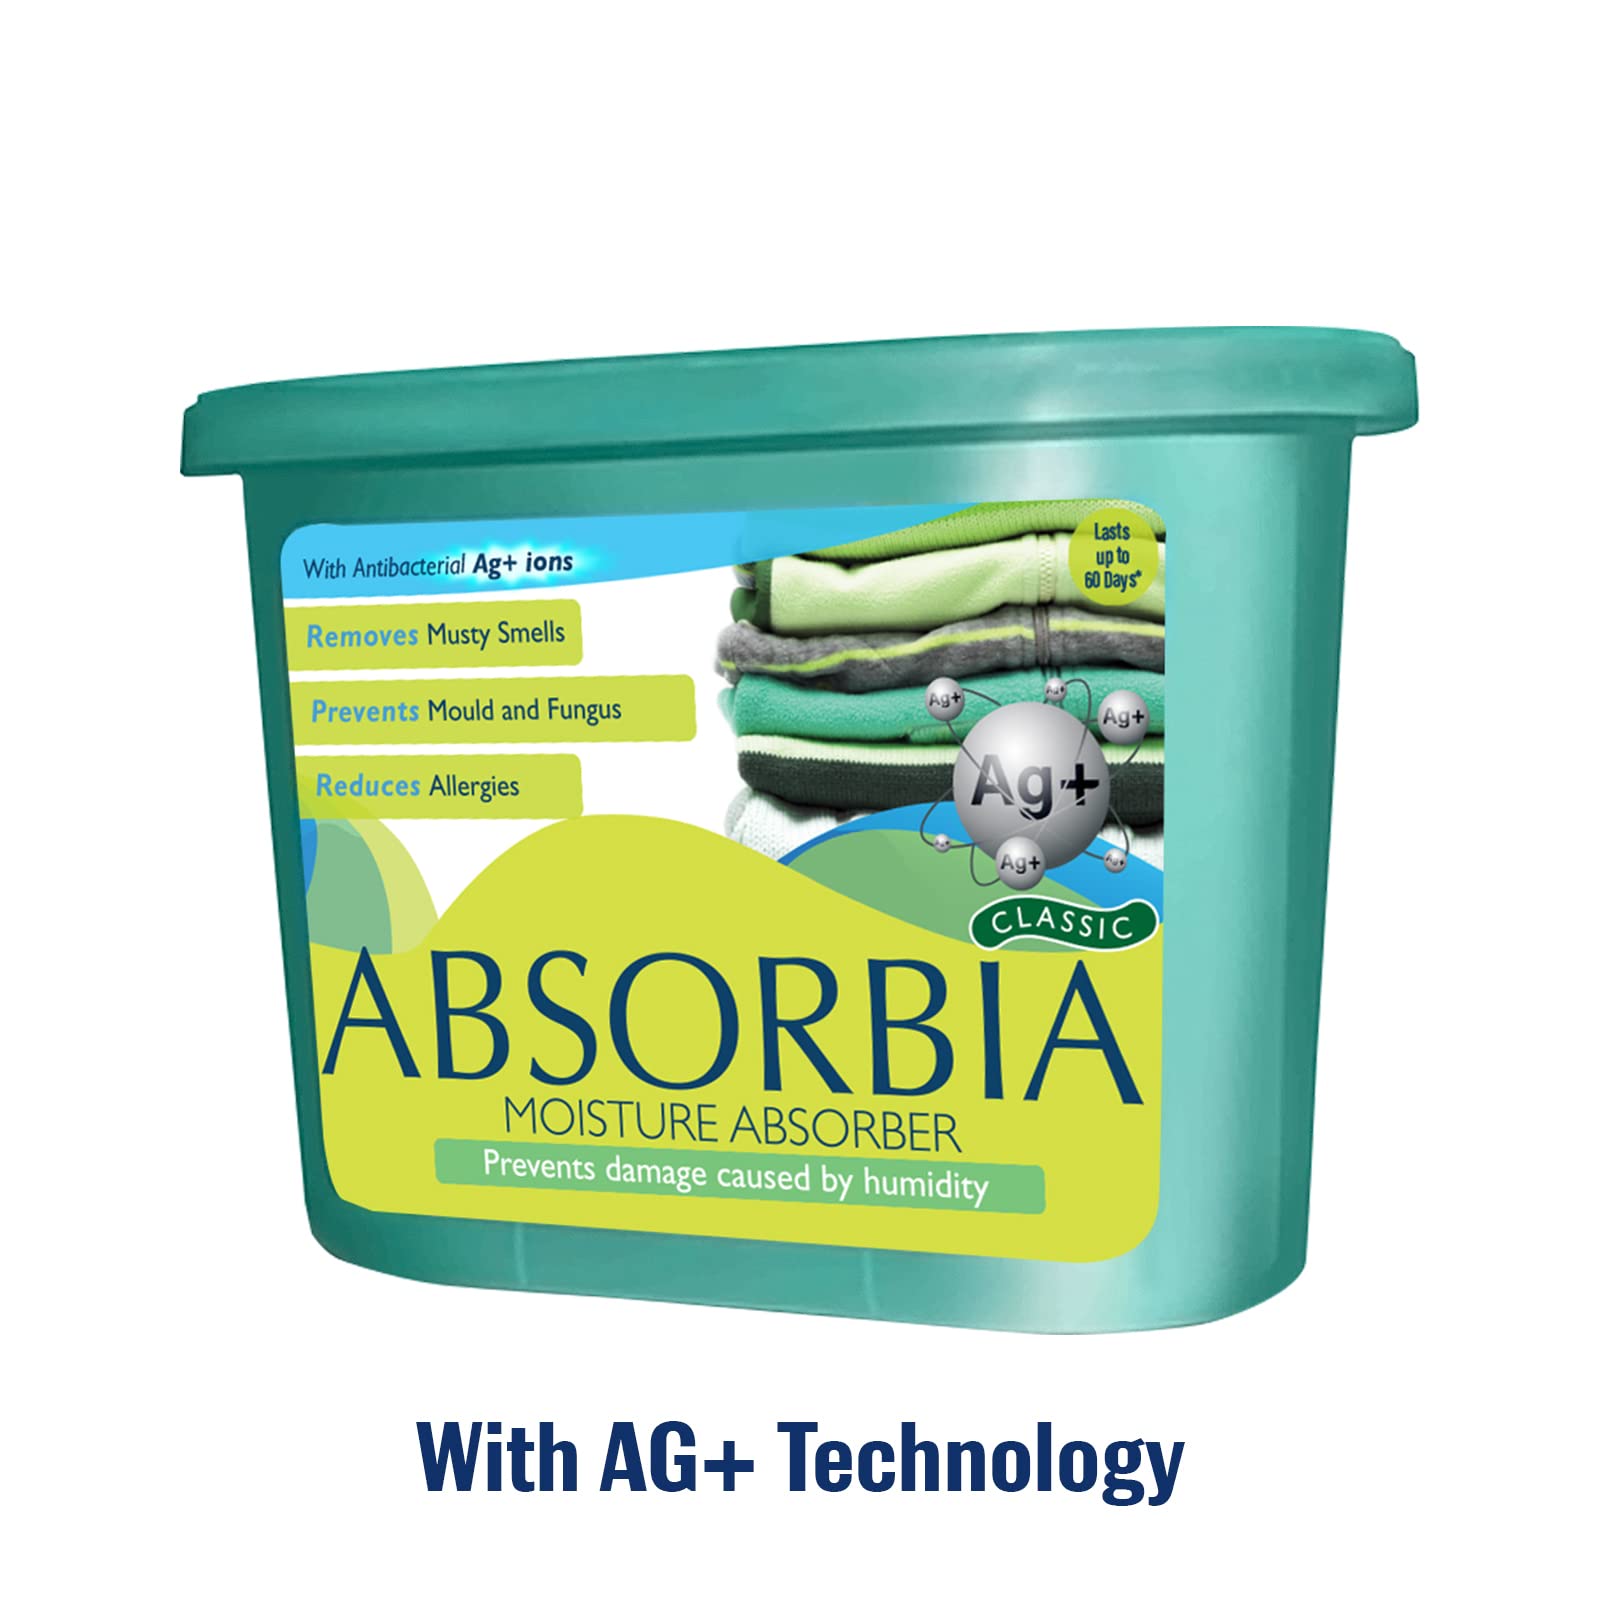 Absorbia Moisture Absorber | Absorbia Classic - Family Pack of 3 (600ml Each) | Dehumidifiers with"AG+ ION" Fights Strongly Against Moisture, Mould, Fungus & Musty smells